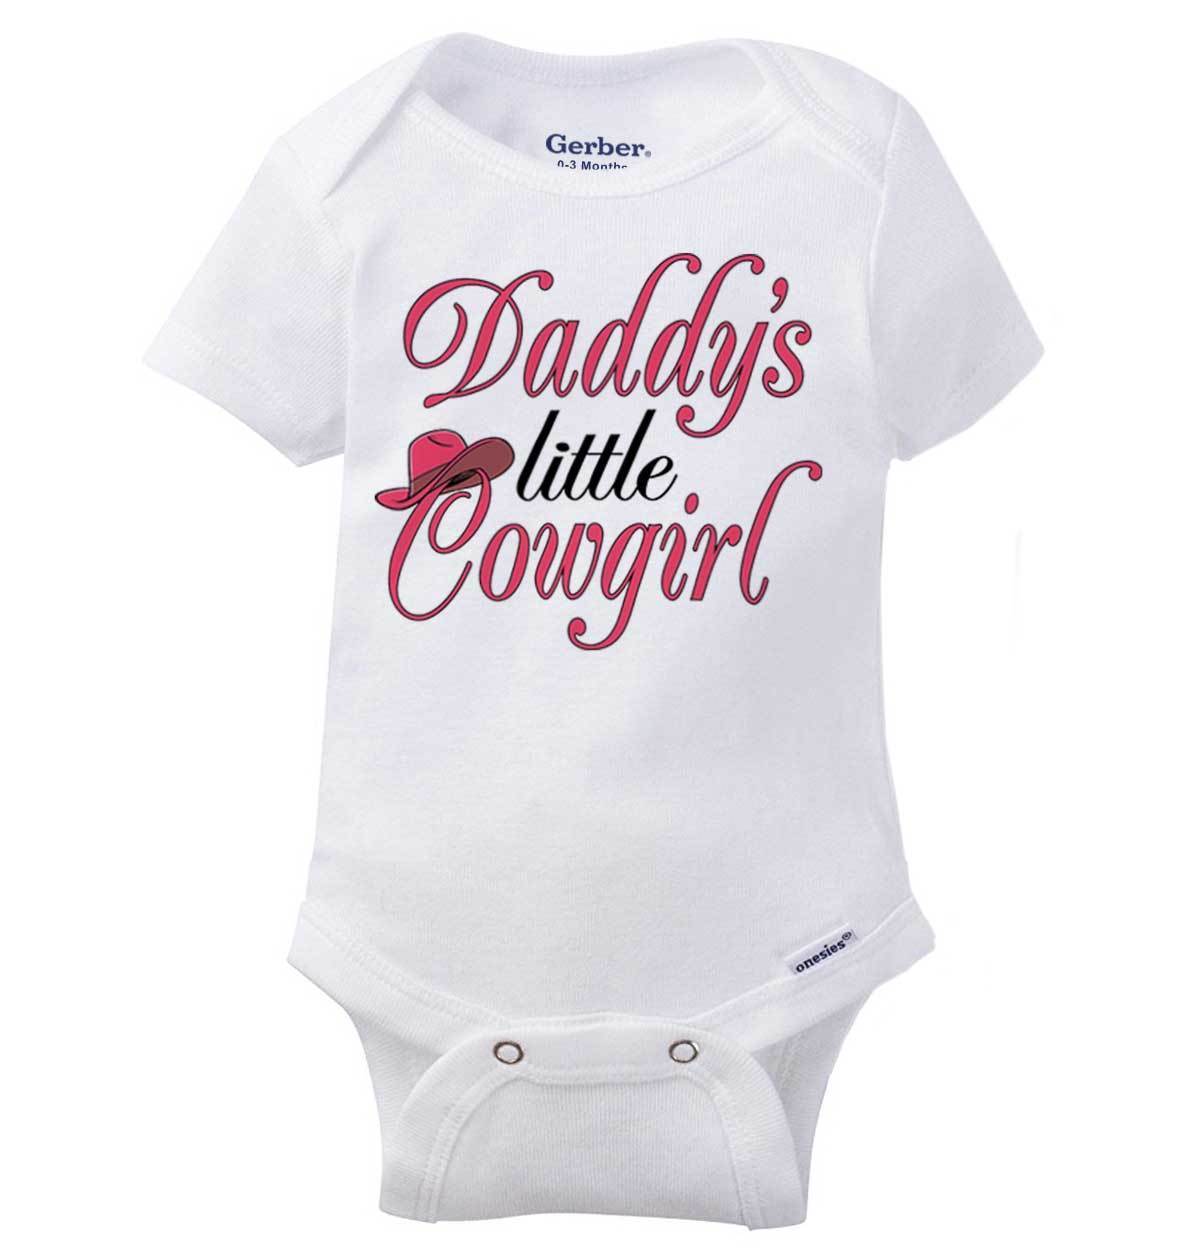 Daddys Little Cowgirl Country Southern Belle Girls Baby Infant Romper Newborn